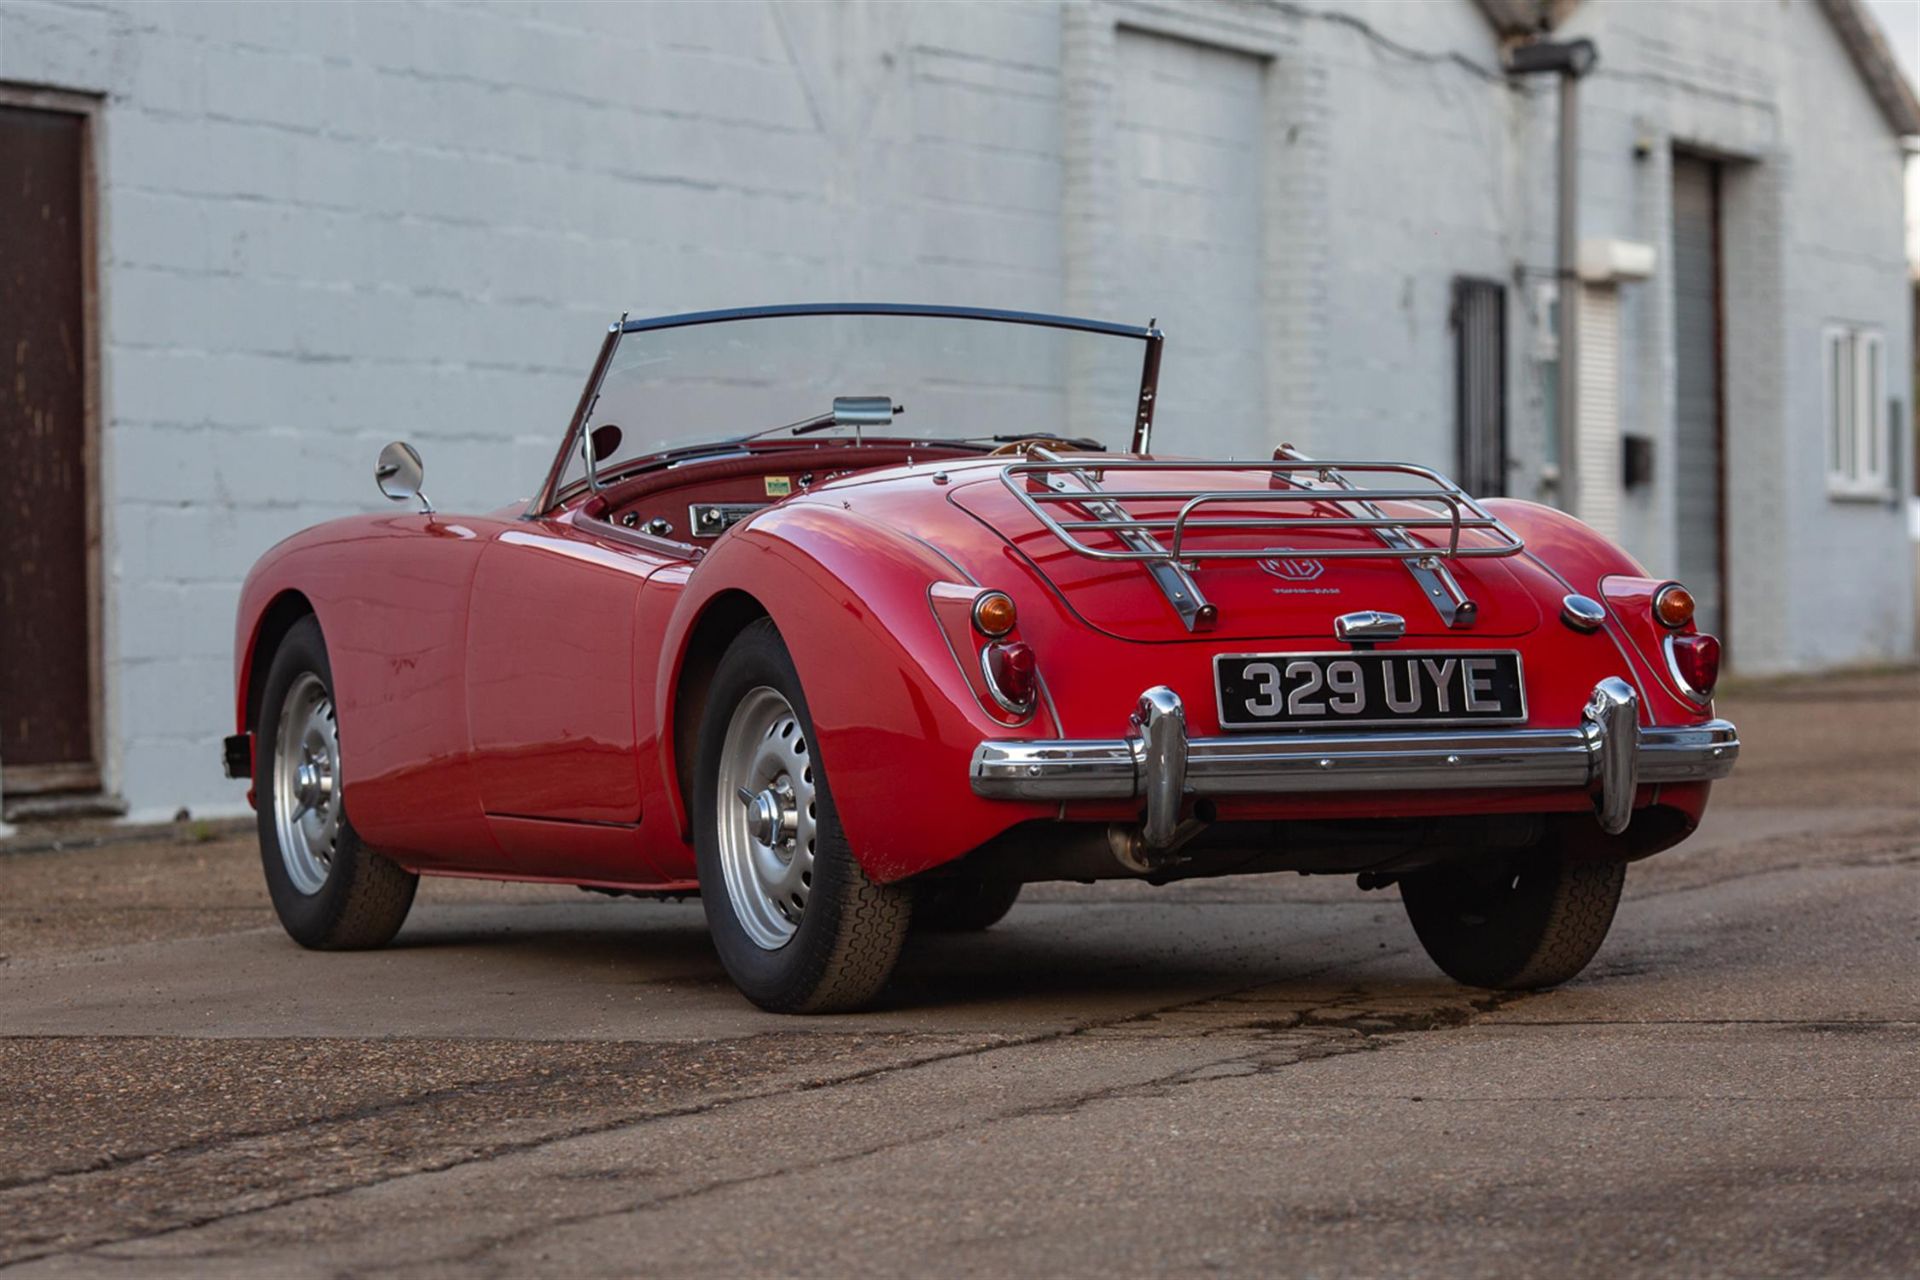 1960 MG A Twin Cam Roadster - Image 4 of 10